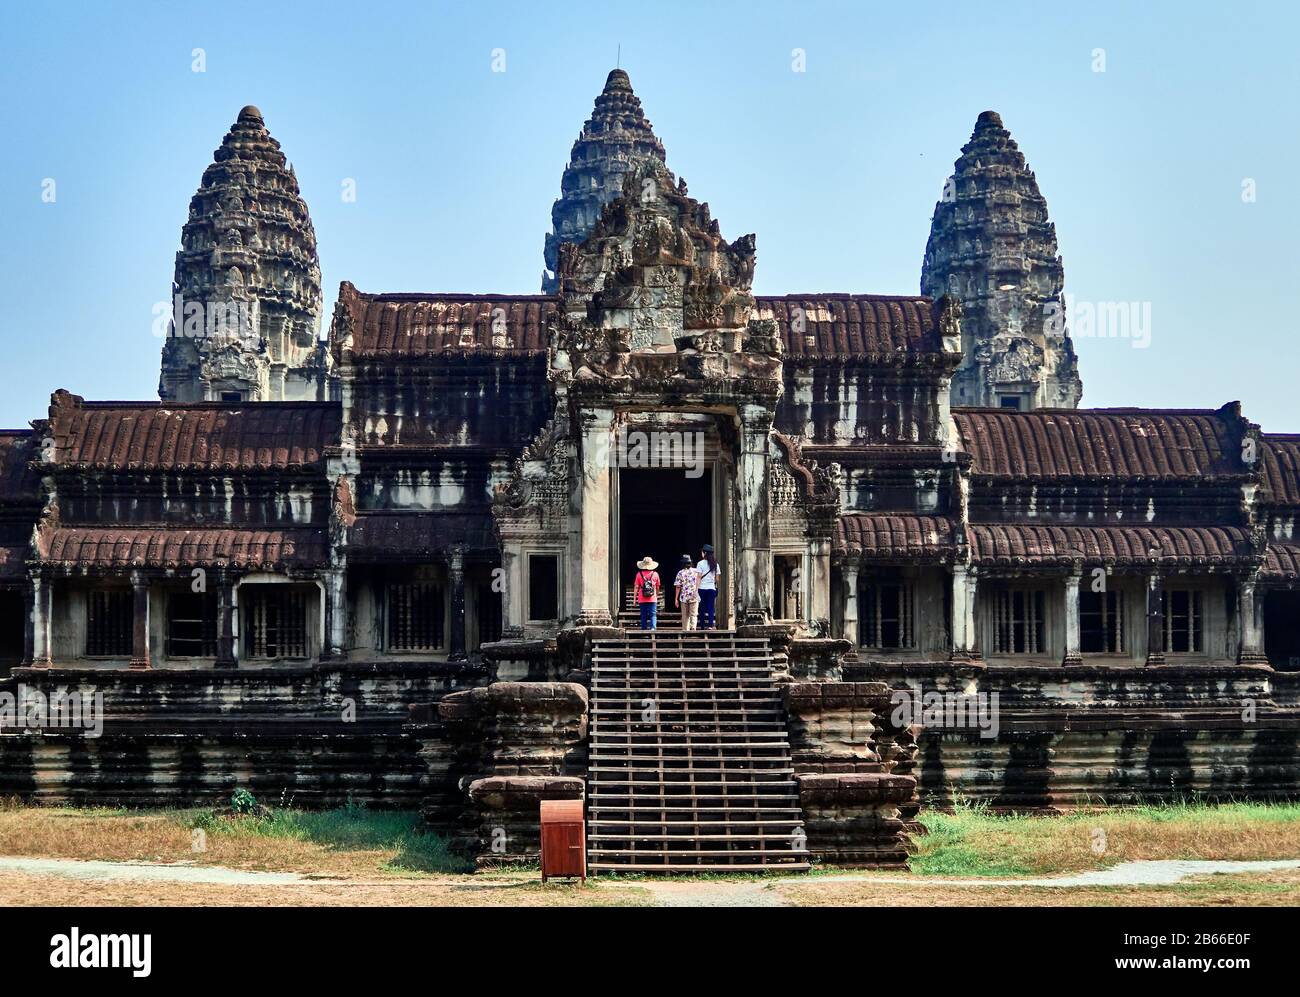 Cambodia, Angkor Wat – built by Suryavarman II (r 1112–52) – is the earthly representation of Mt Meru, the Mt Olympus of the Hindu faith and the abode of ancient gods. The Cambodian god-kings of old each strove to better their ancestors’ structures in size, scale and symmetry, culminating in what is believed to be the world’s largest religious building. Stock Photo